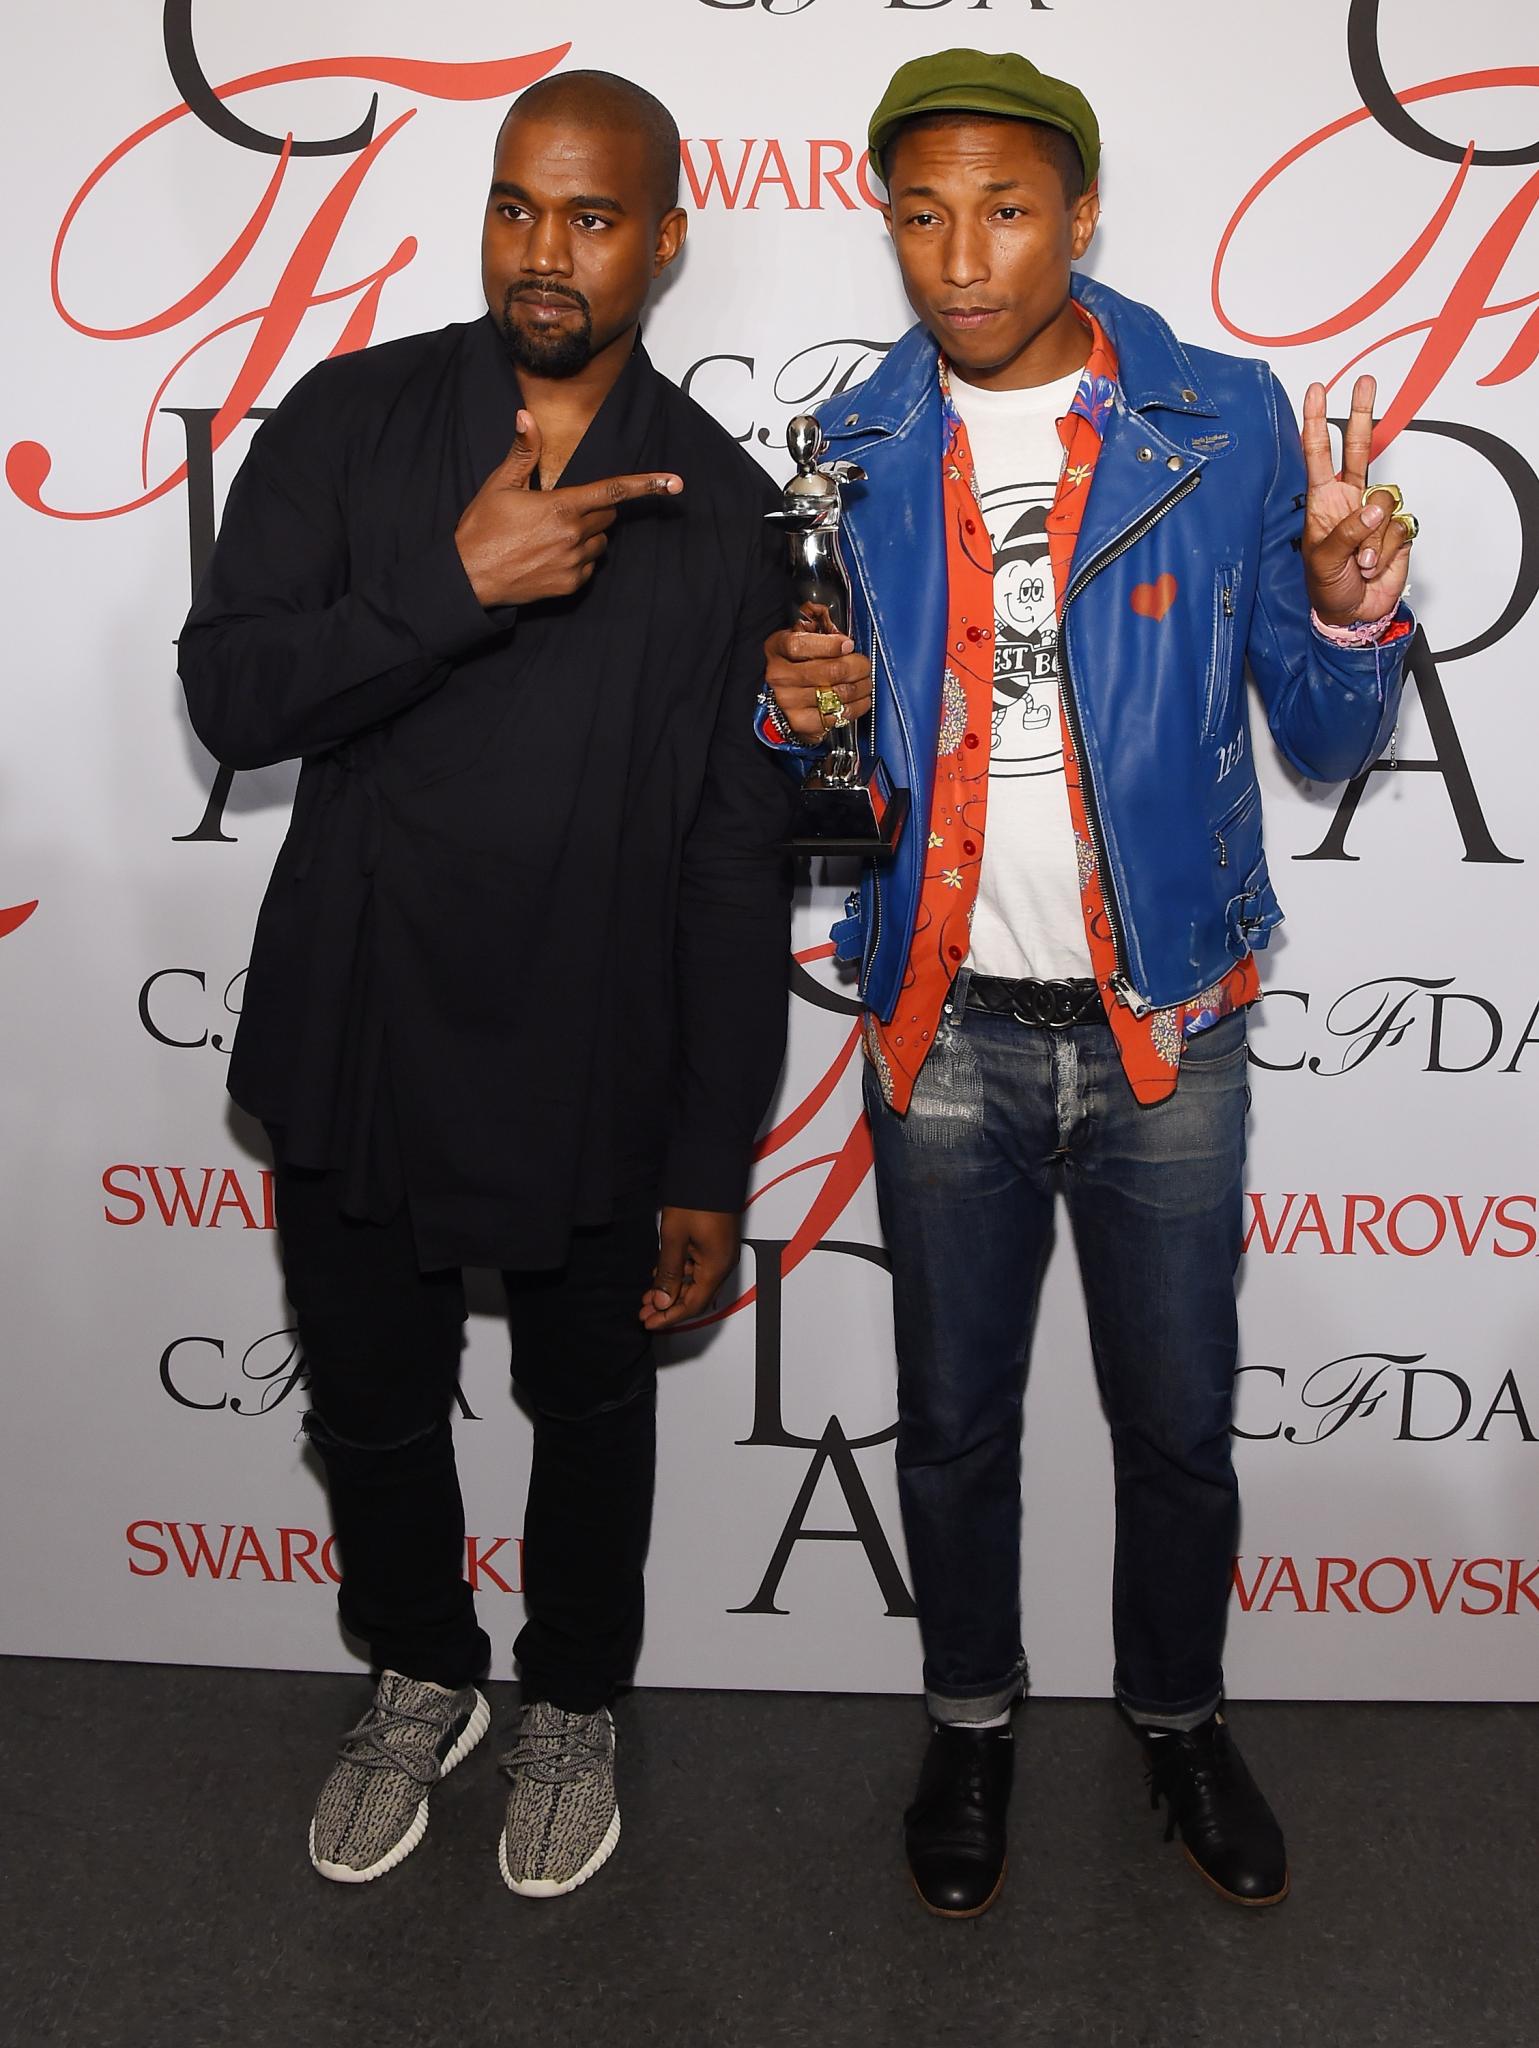 16 Chic Moments From the 2015 CFDA Awards